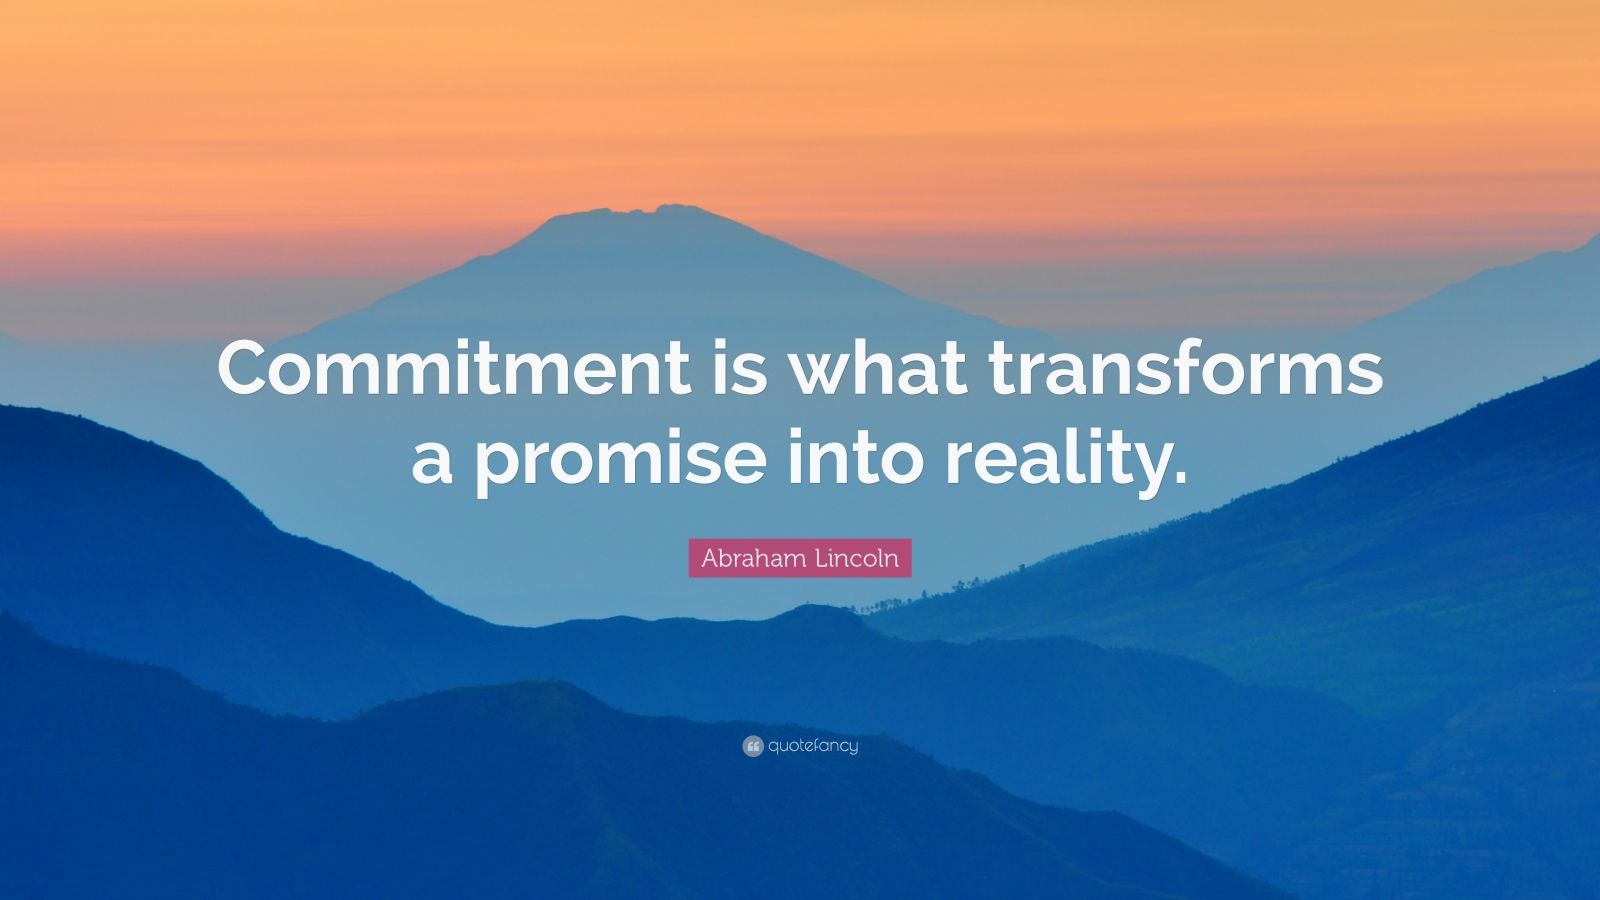 "commitment is what transforms a promise into reality.